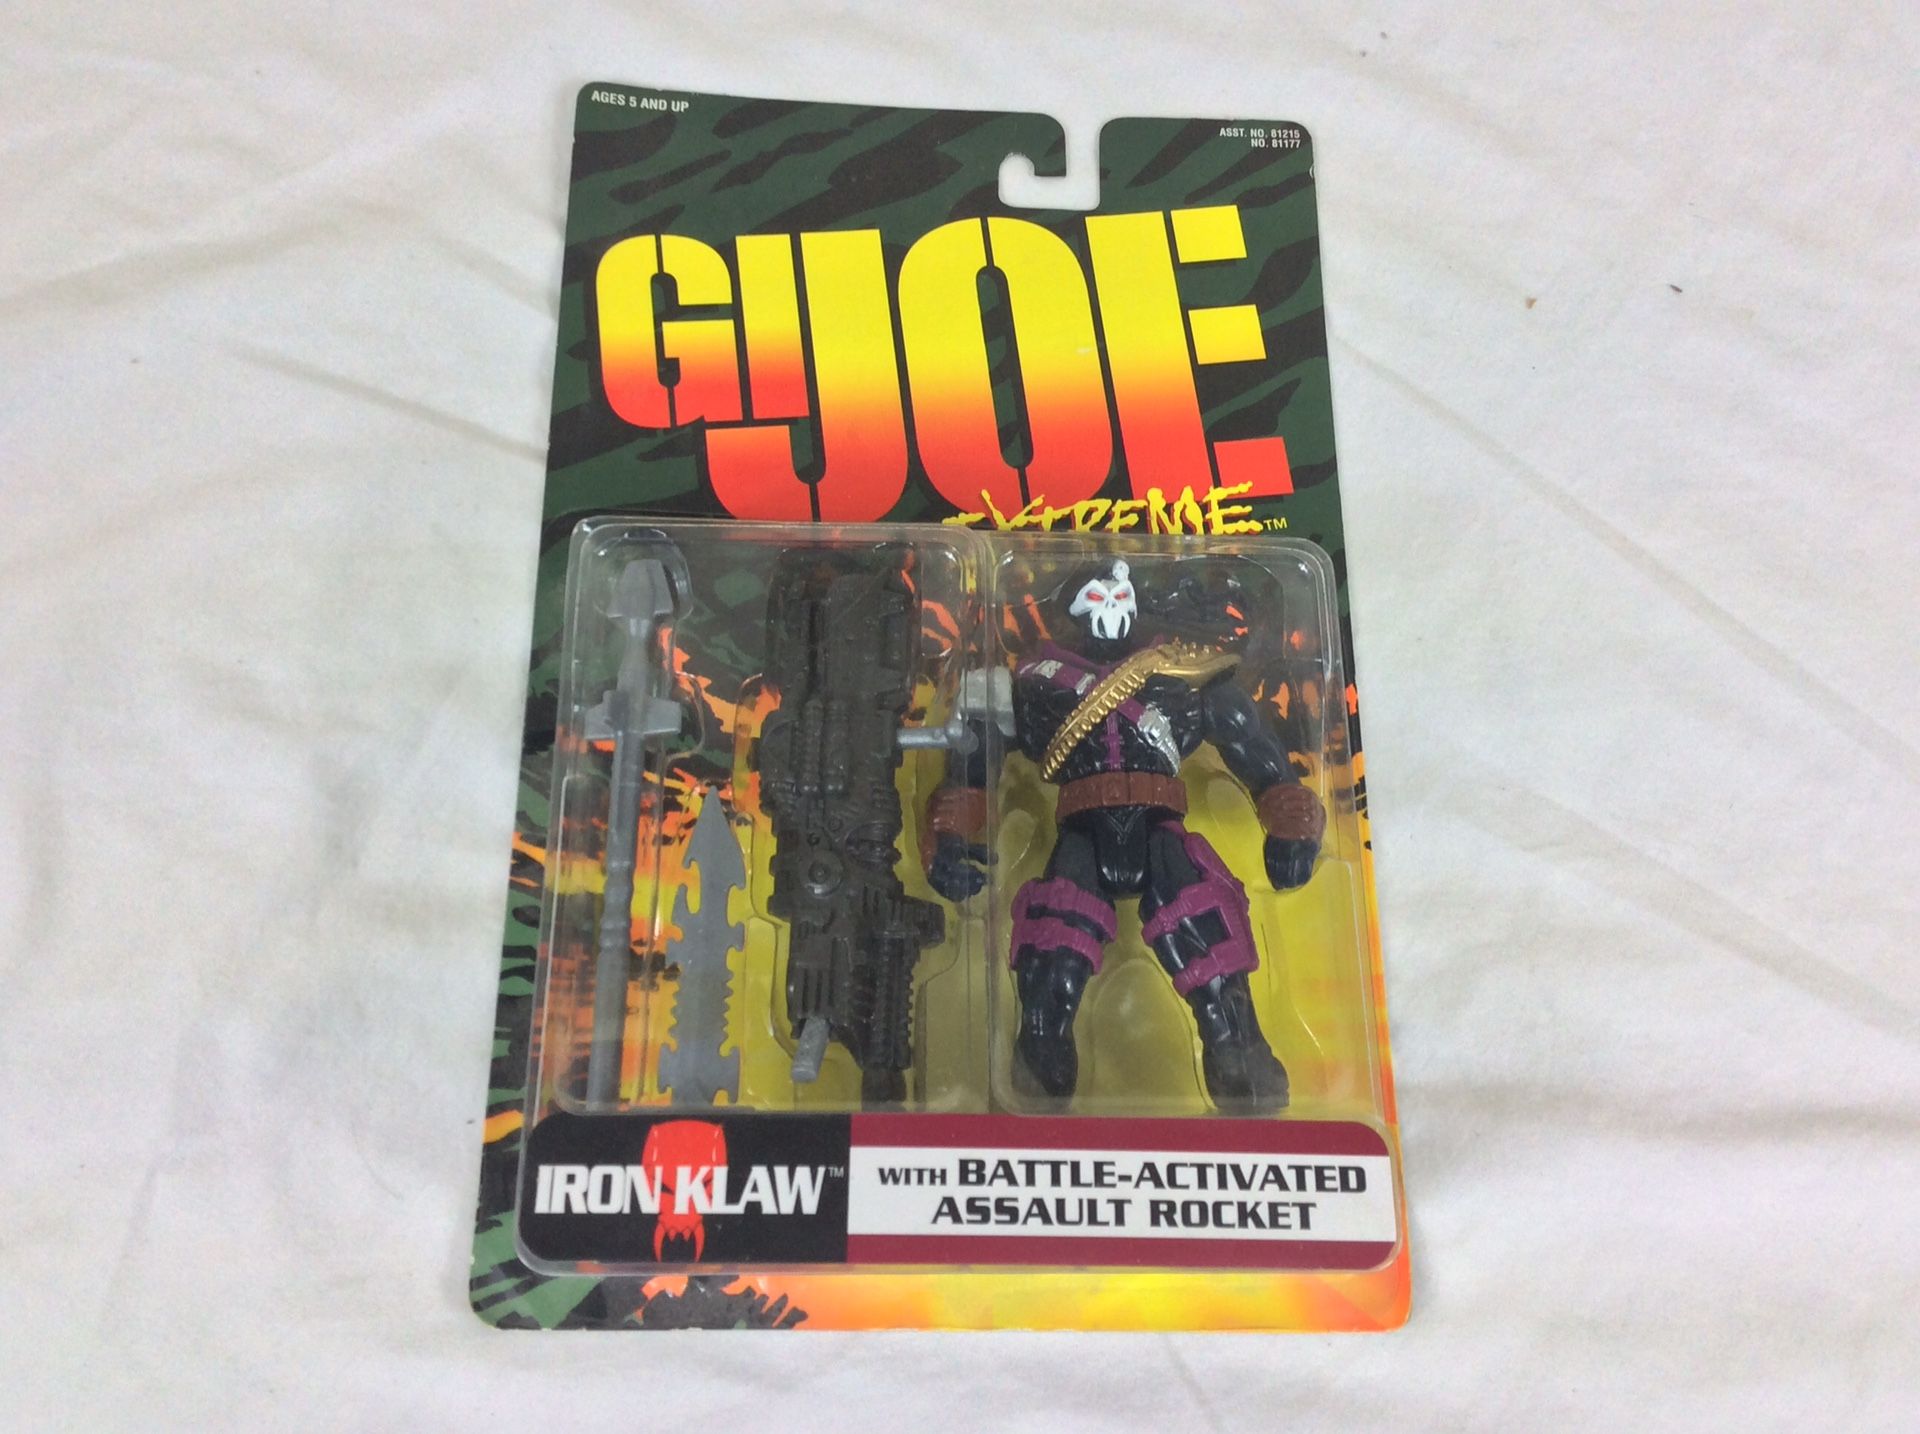 GI Joe Extreme: Iron Klaw Action Figure New In Package 1995